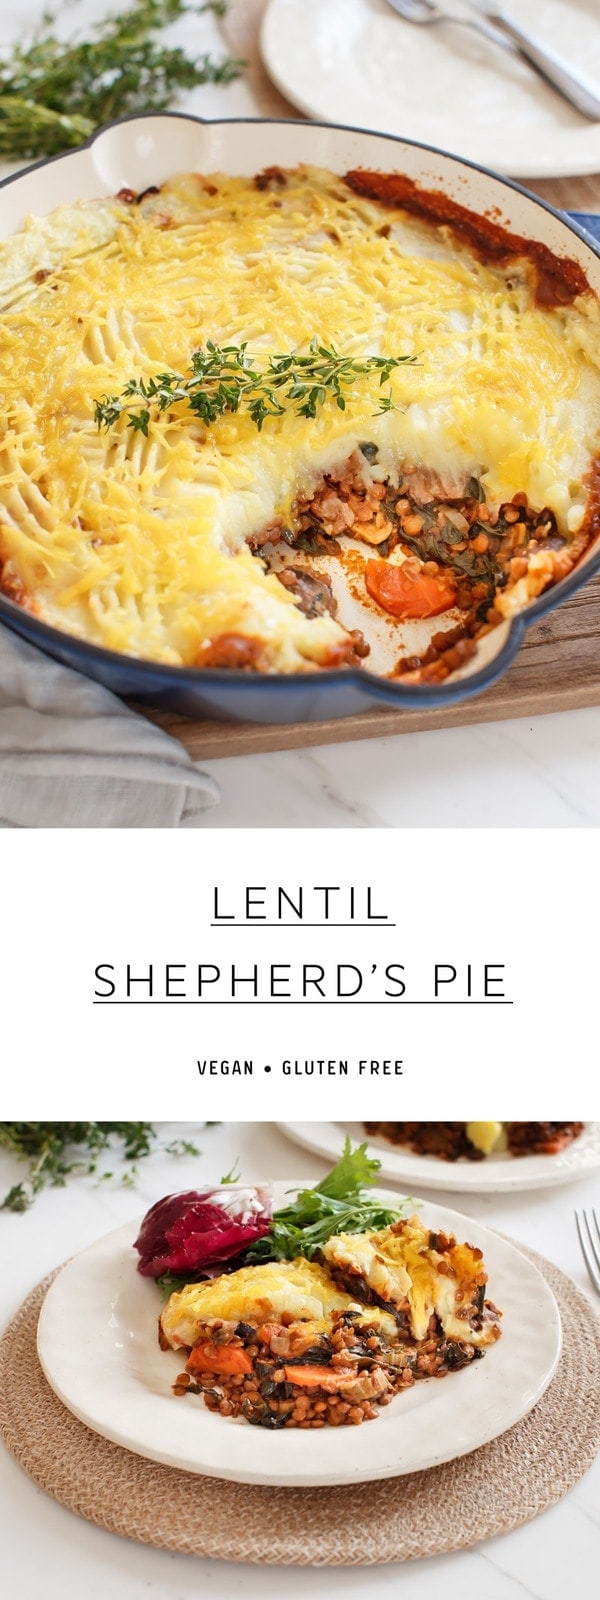 This vegan Lentil Shepherd’s pie is the ultimate in vegan family meals. A great winter recipe – it is infused with fresh herbs and has a generous amount of spinach hiding inside. #veganfamilymeals #veganfamilyrecipes #wintermealideas #winterrecipes #veganshepherdspie #lentilshepherdspie #plantbaseddinners #vegandinners #glutenfreefamilydinners #veganfamilymealskids #AscensionKitchen // Pin to your own inspiration board! // 